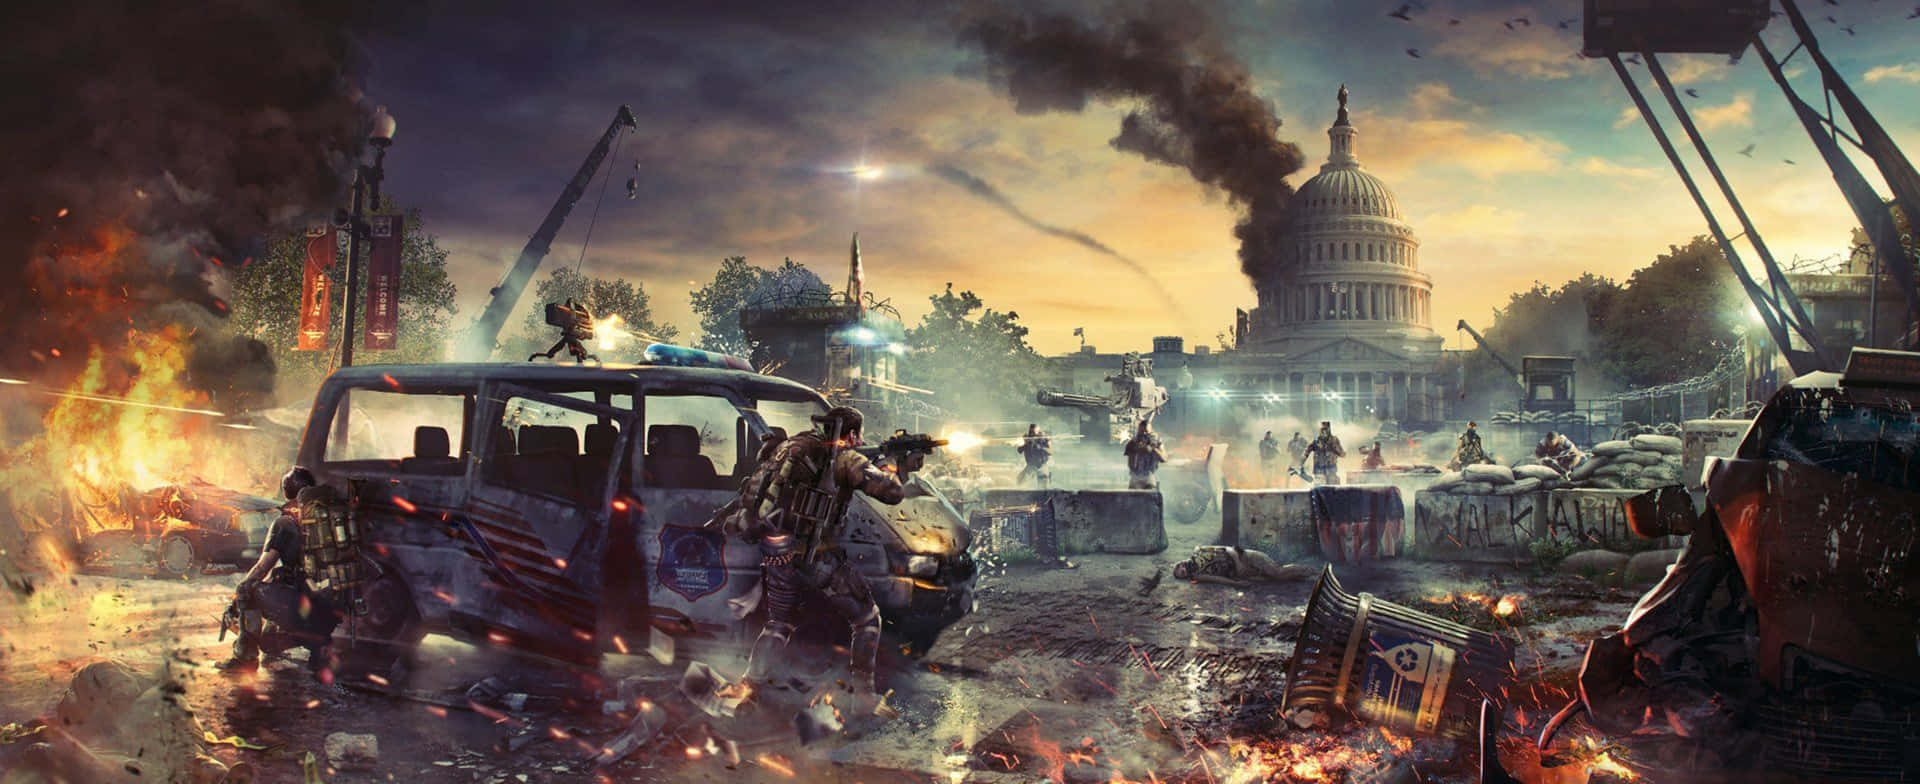 Enter a dystopian world of hope and discovery in Tom Clancy's The Division 2 Wallpaper